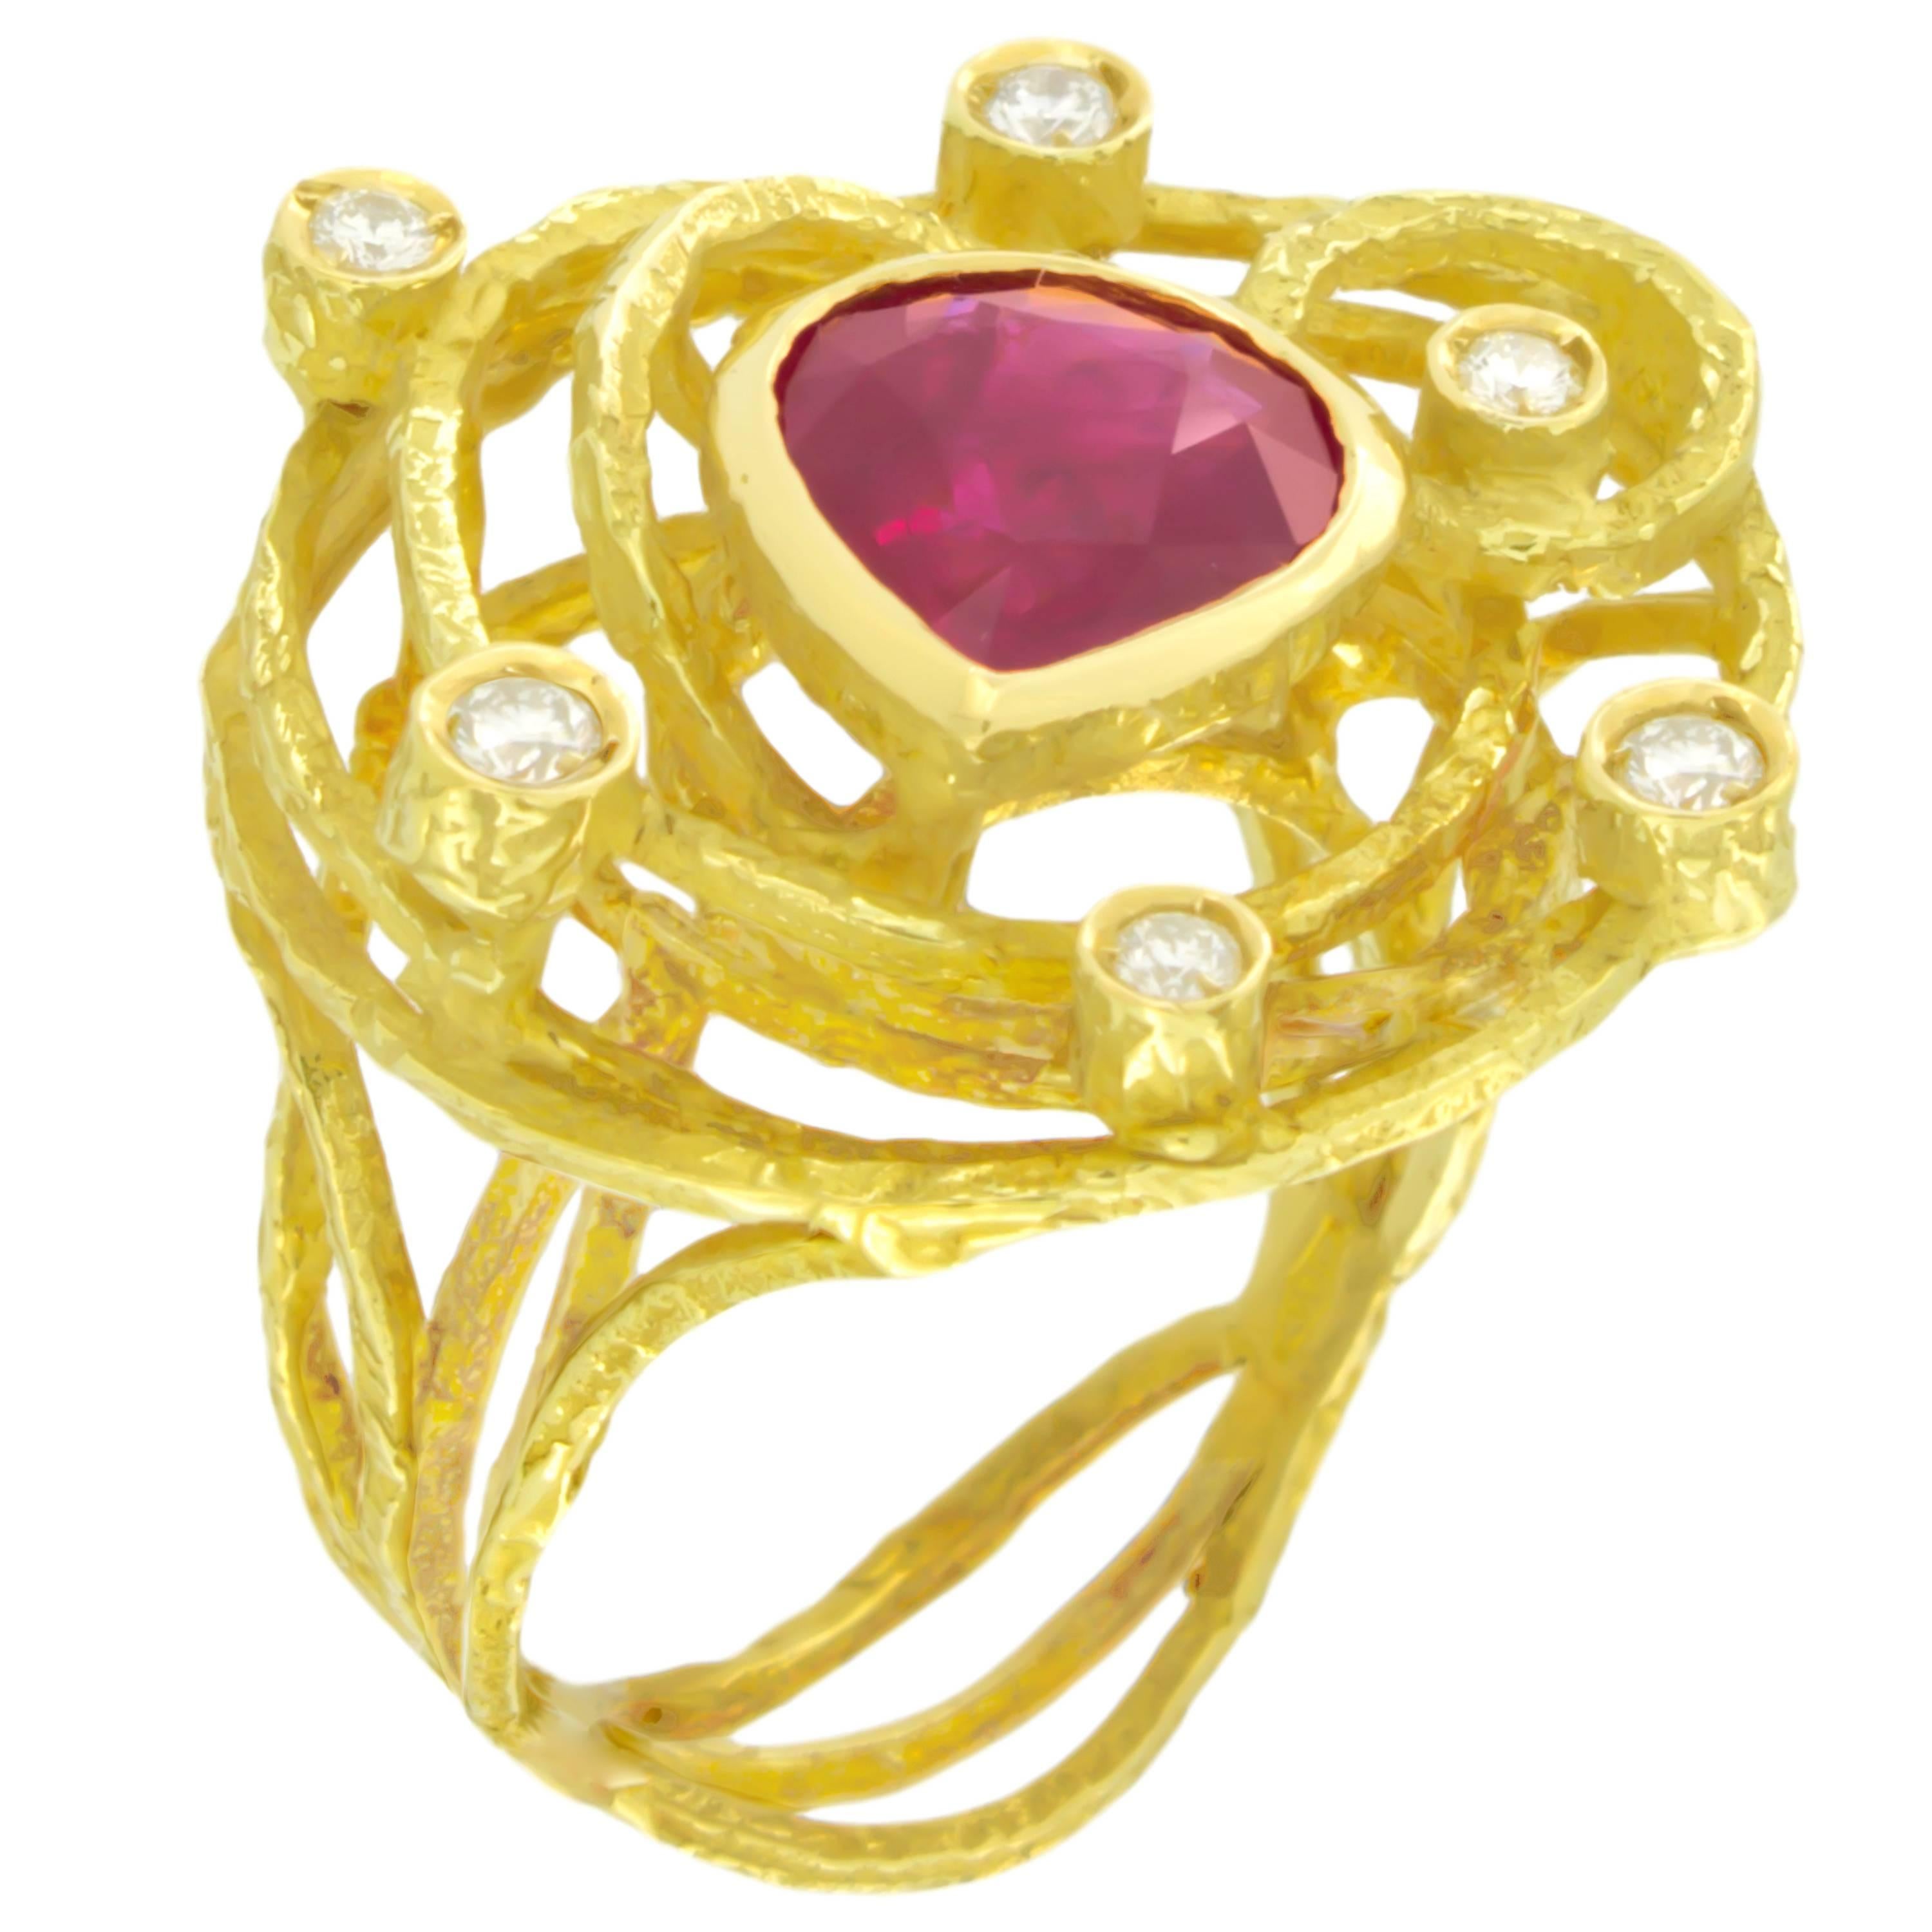 Sacchi 3.39 Carat Pear Ruby and Diamonds Gemstone 18k Yellow Gold Cocktail Ring For Sale